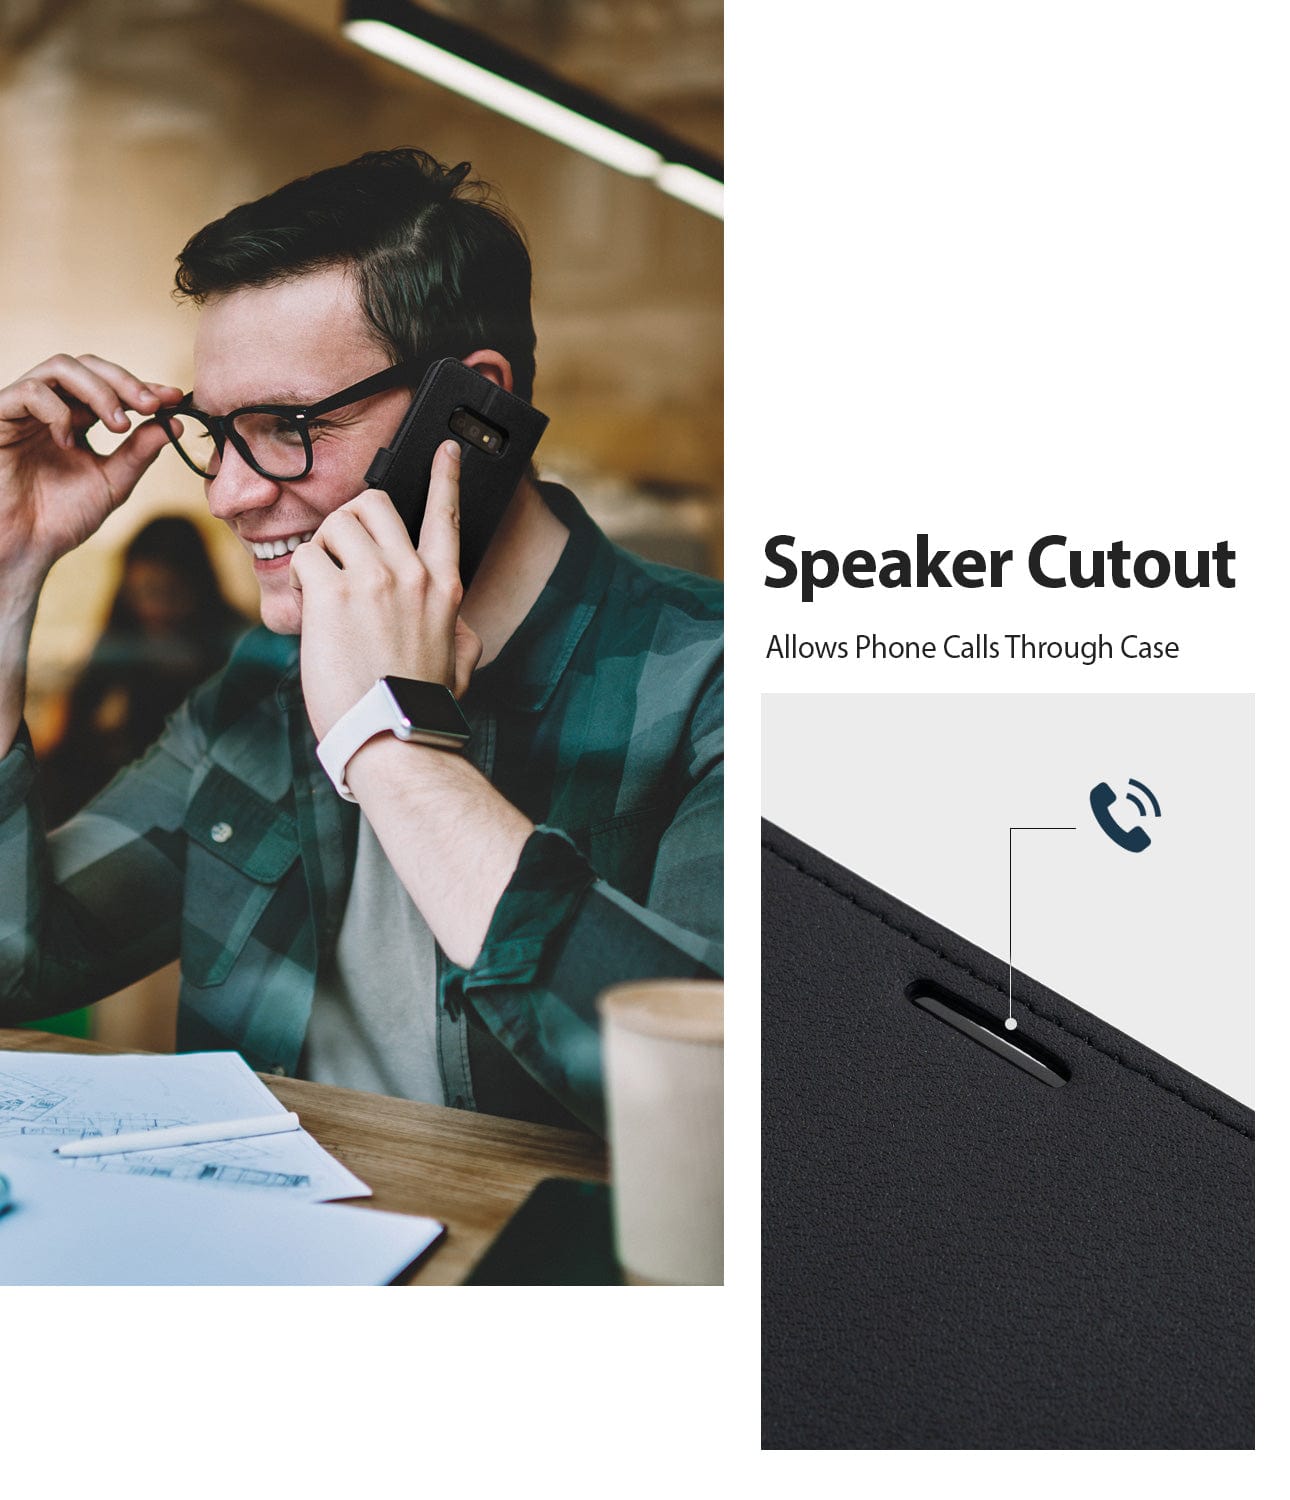 The speaker cutout allows phone calls to be made and received without removing the case, ensuring seamless communication.